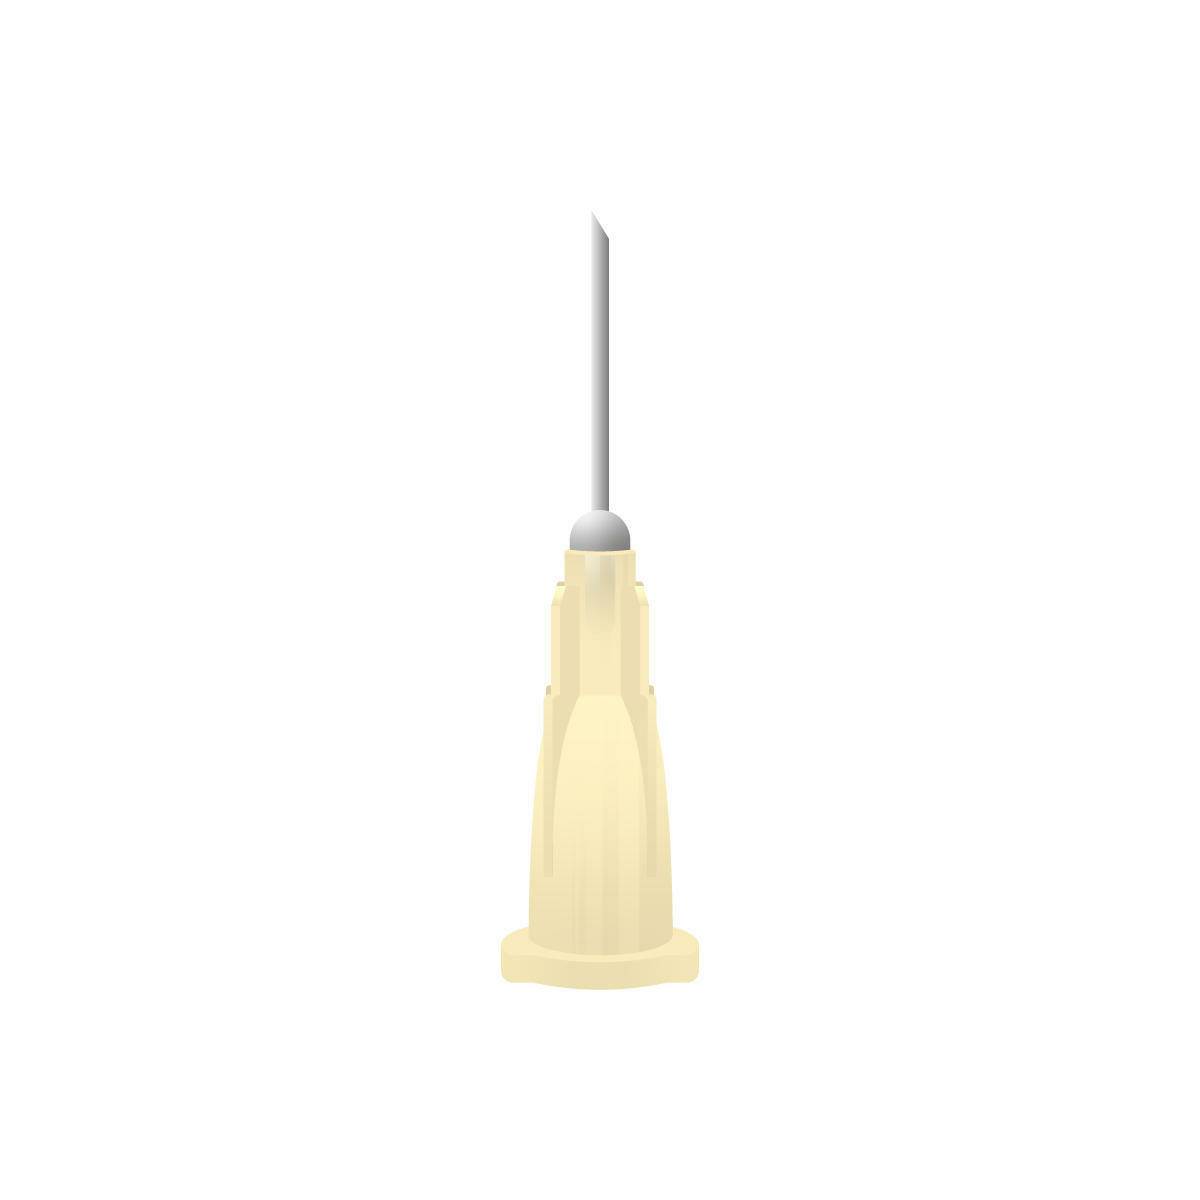 20g 1/2 inch Agriject Disposable Needles Poly Hub